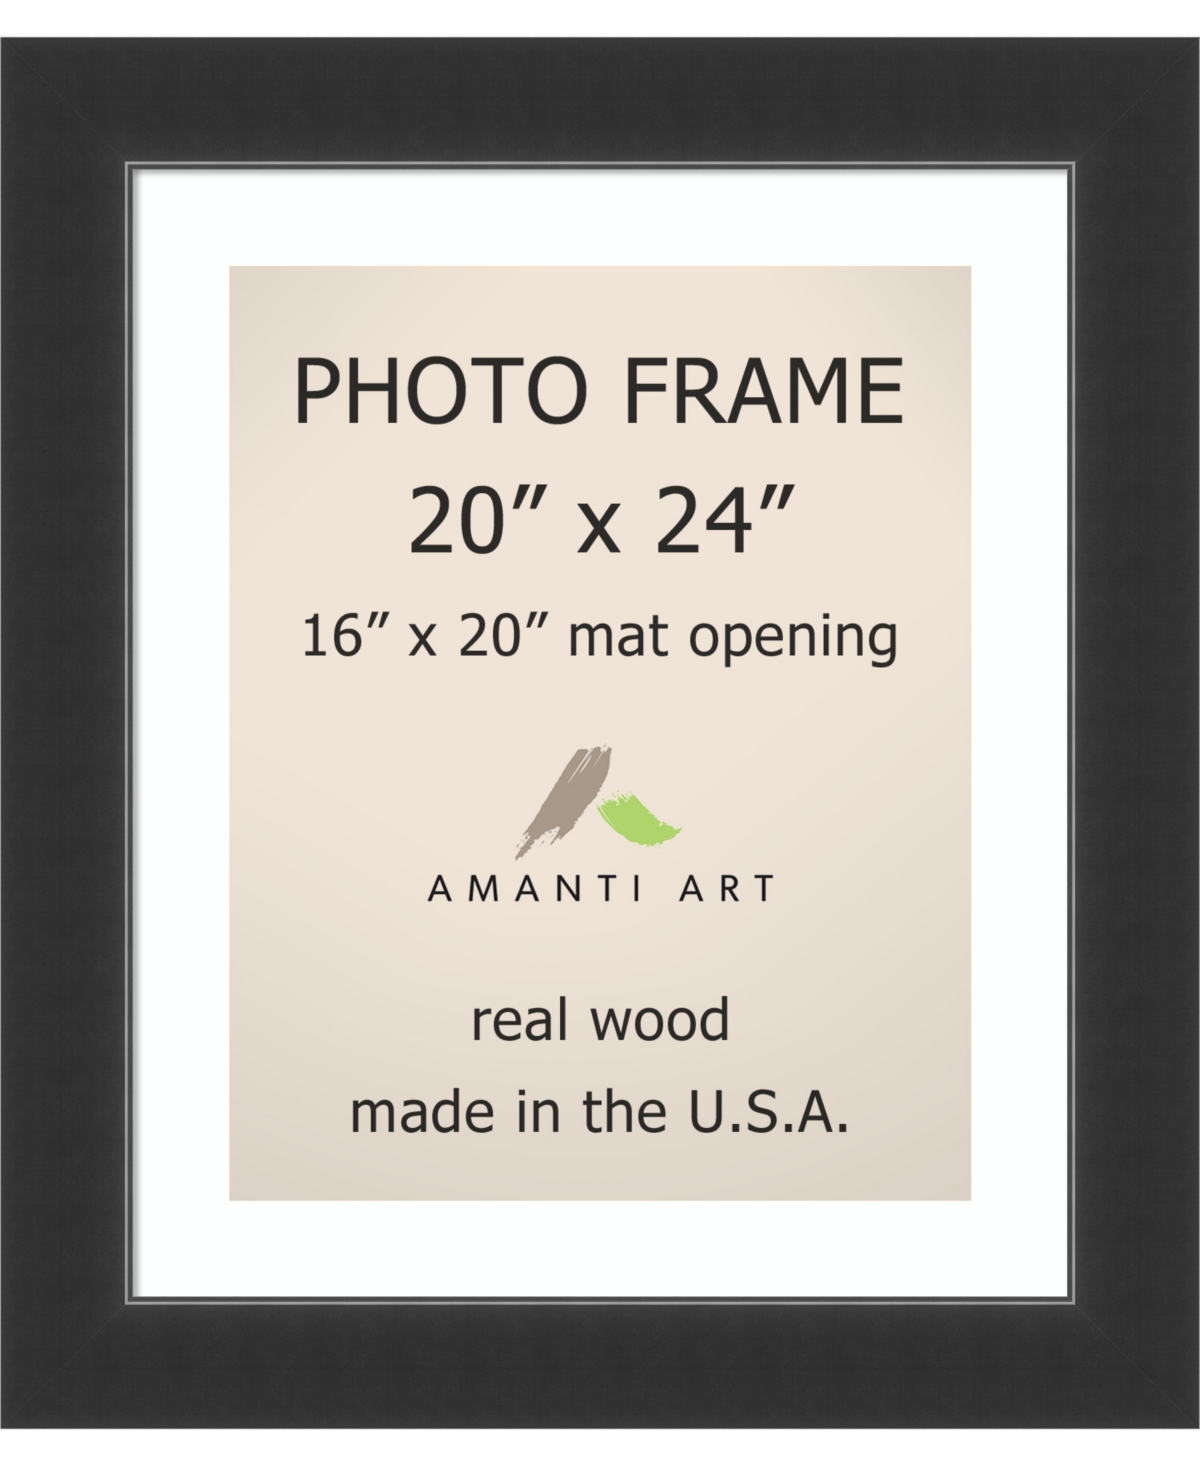 Amanti Art Corvino Black 20 X 24 Matted to 16 X 20 Opening Wall Picture Photo Frame